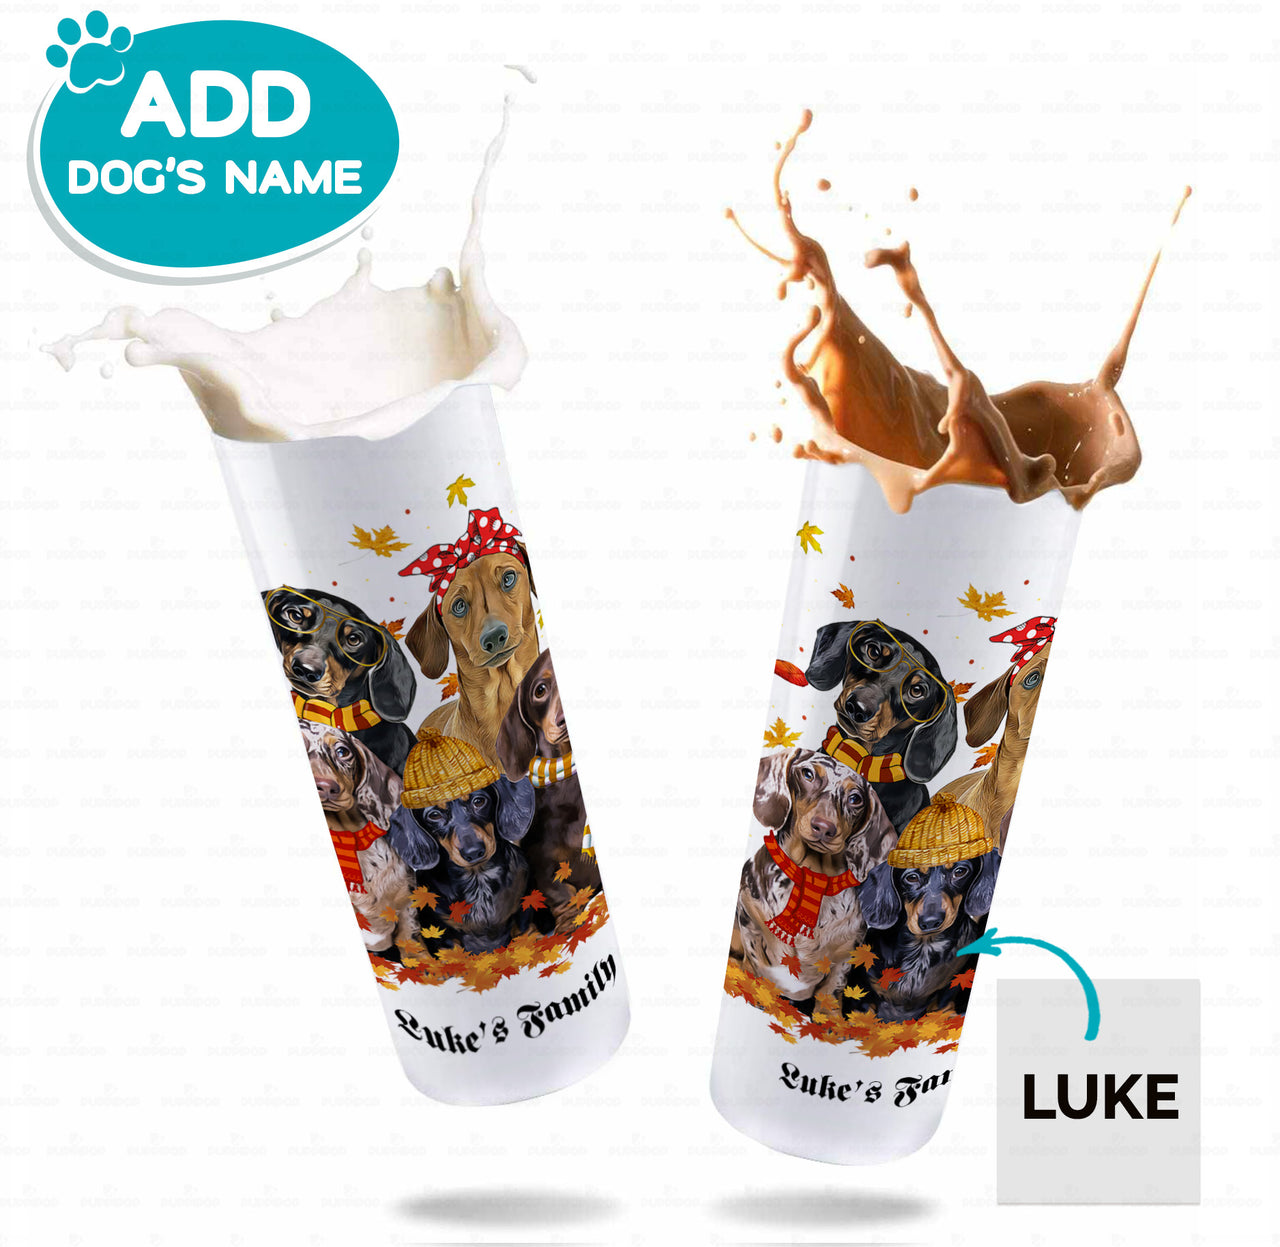 Personalized Dog Gift Idea - Dachshund Family For Dog Lover - Tumbler